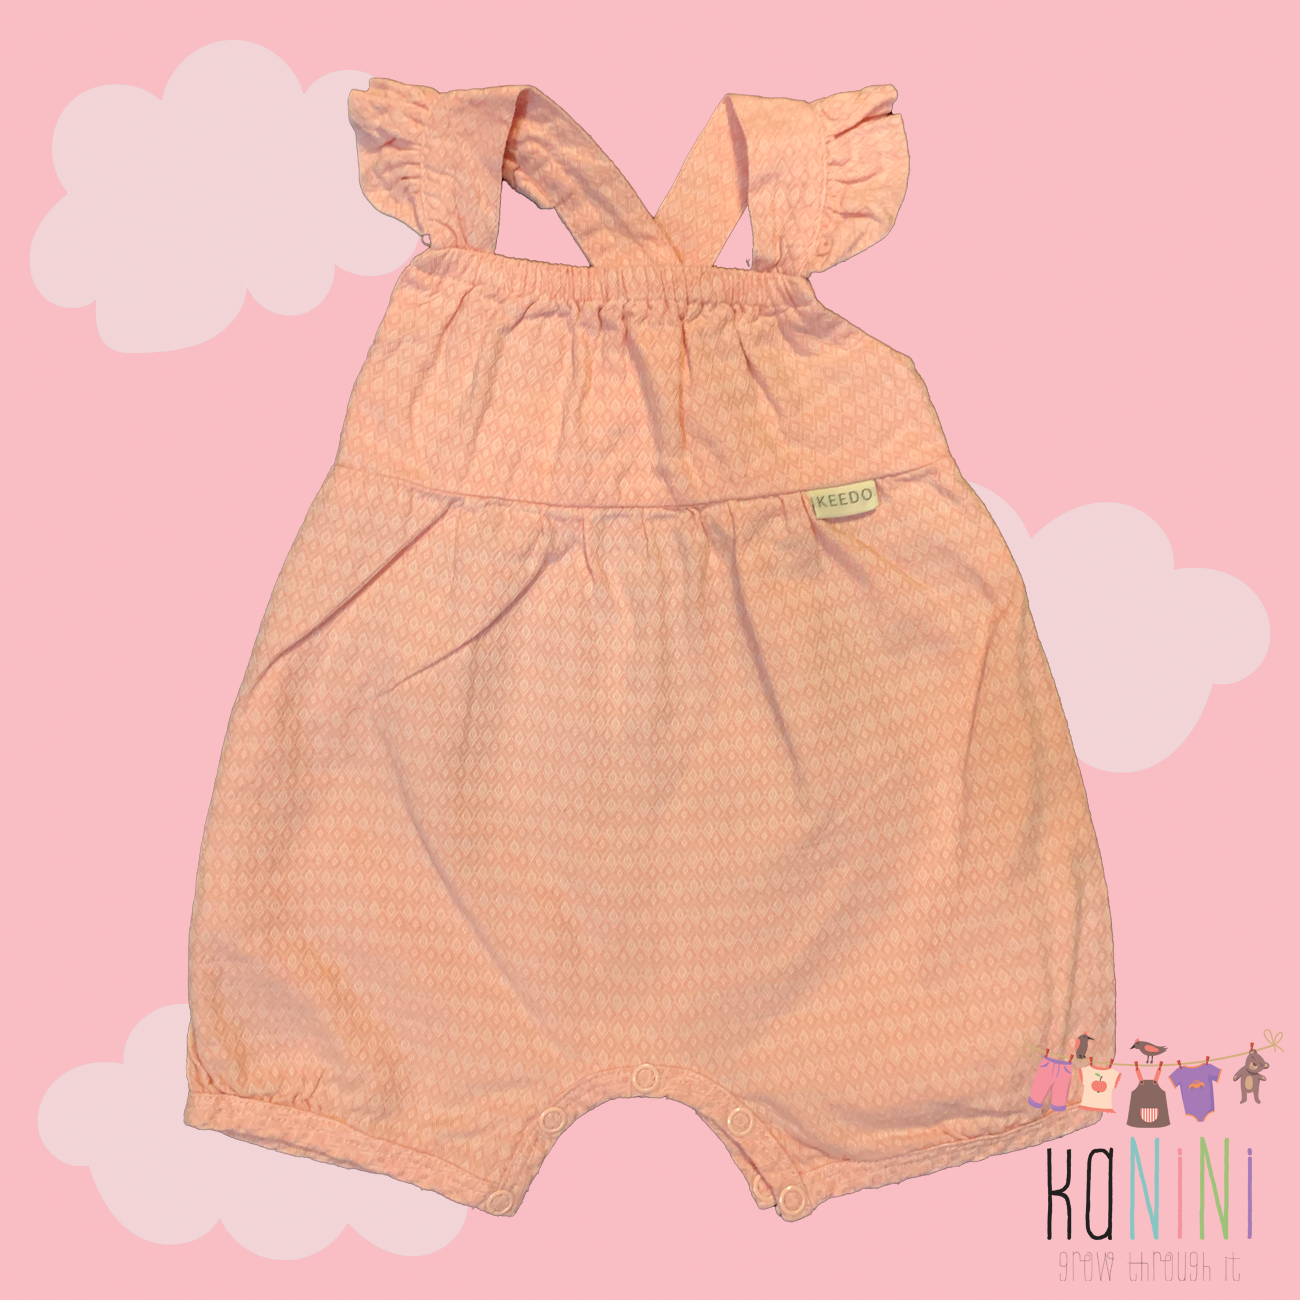 Featured image for “Keedo 0 - 3 Months Girls Romper”